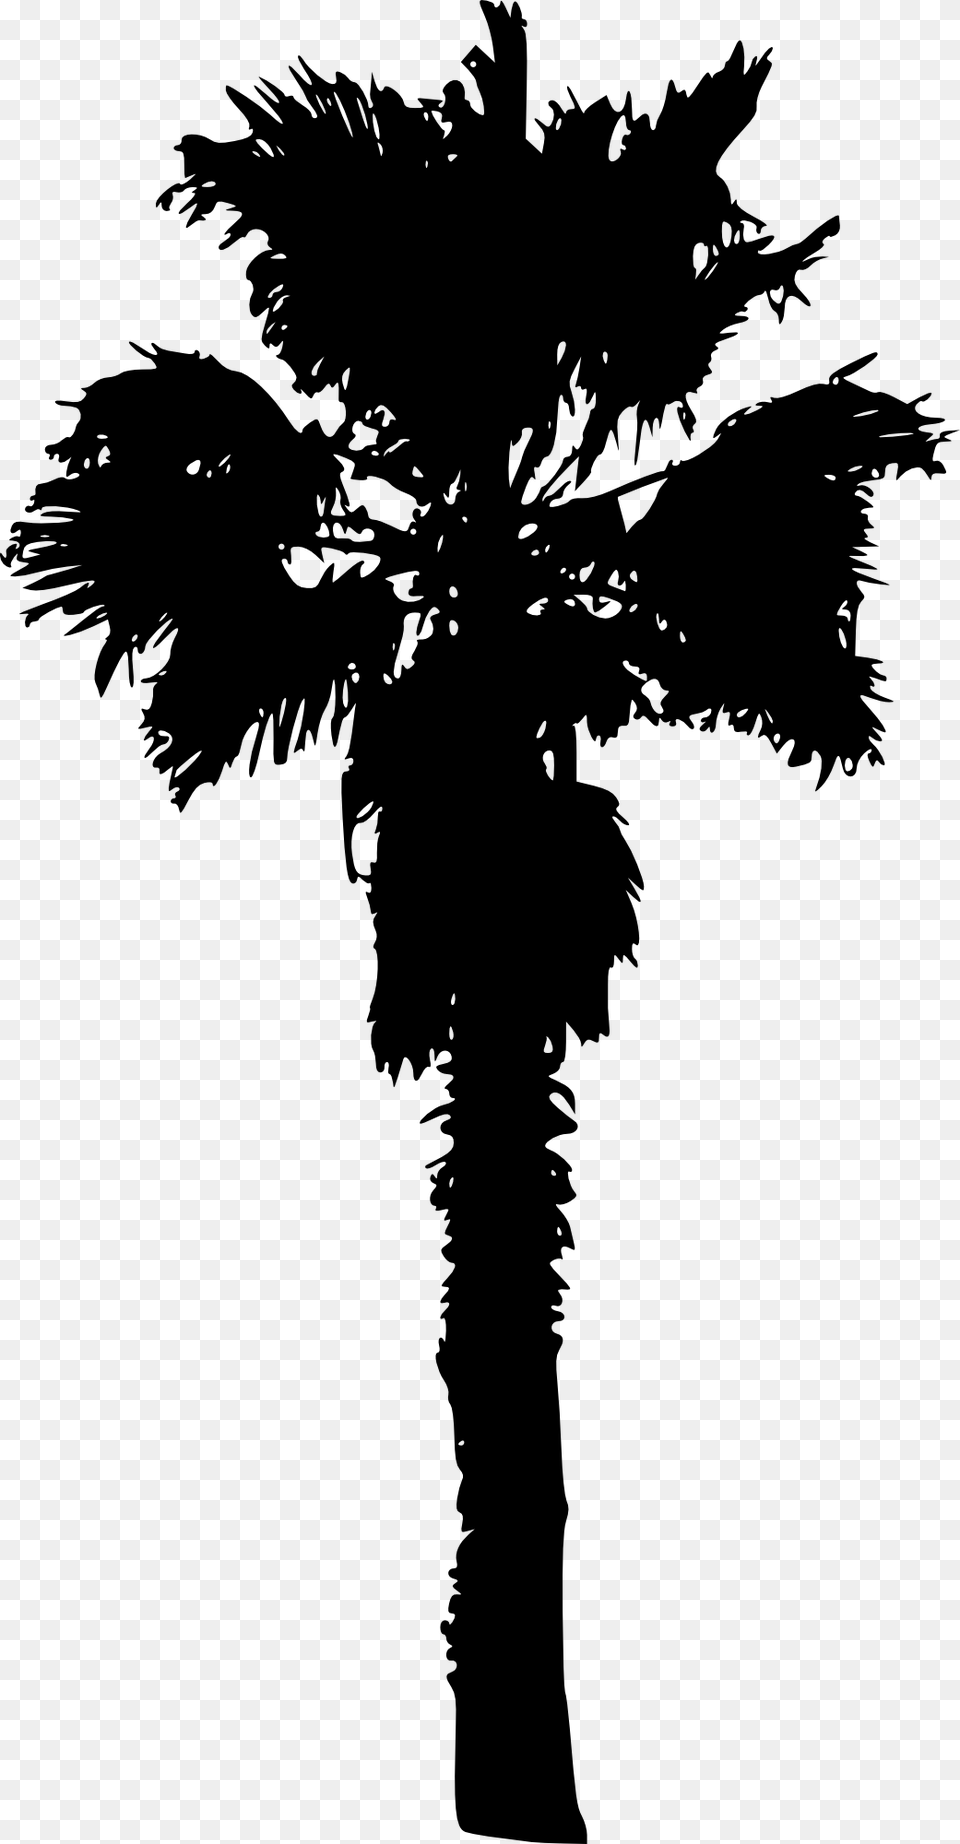 Palm Tree Silhouettes Transparent Background Portable Network Graphics, Palm Tree, Plant, Silhouette, Person Free Png